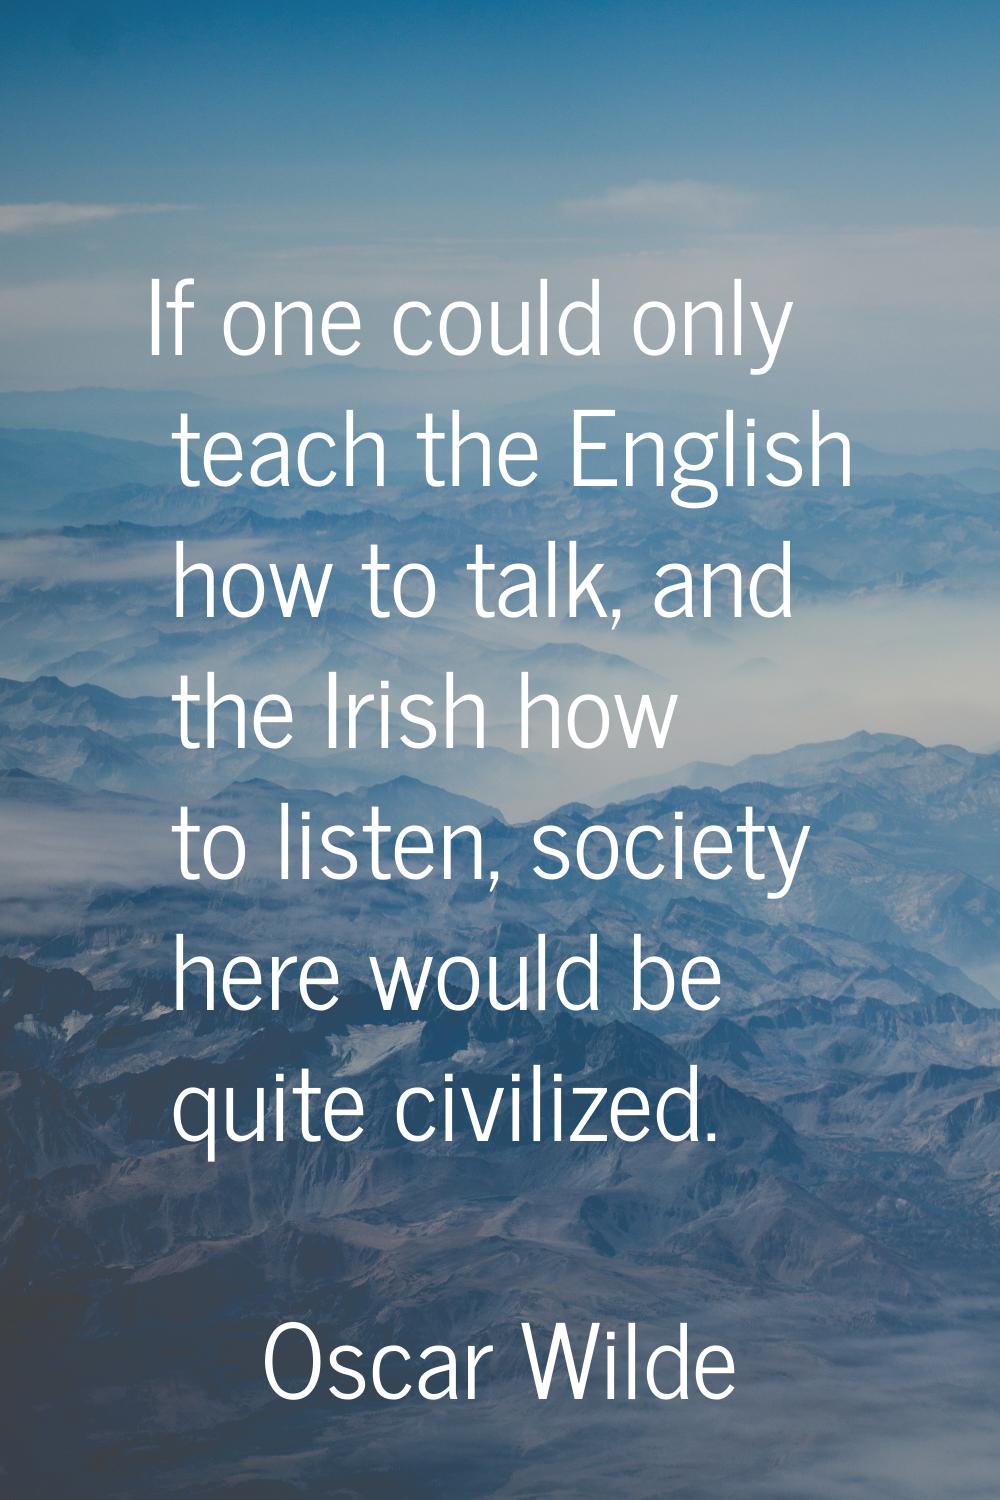 If one could only teach the English how to talk, and the Irish how to listen, society here would be